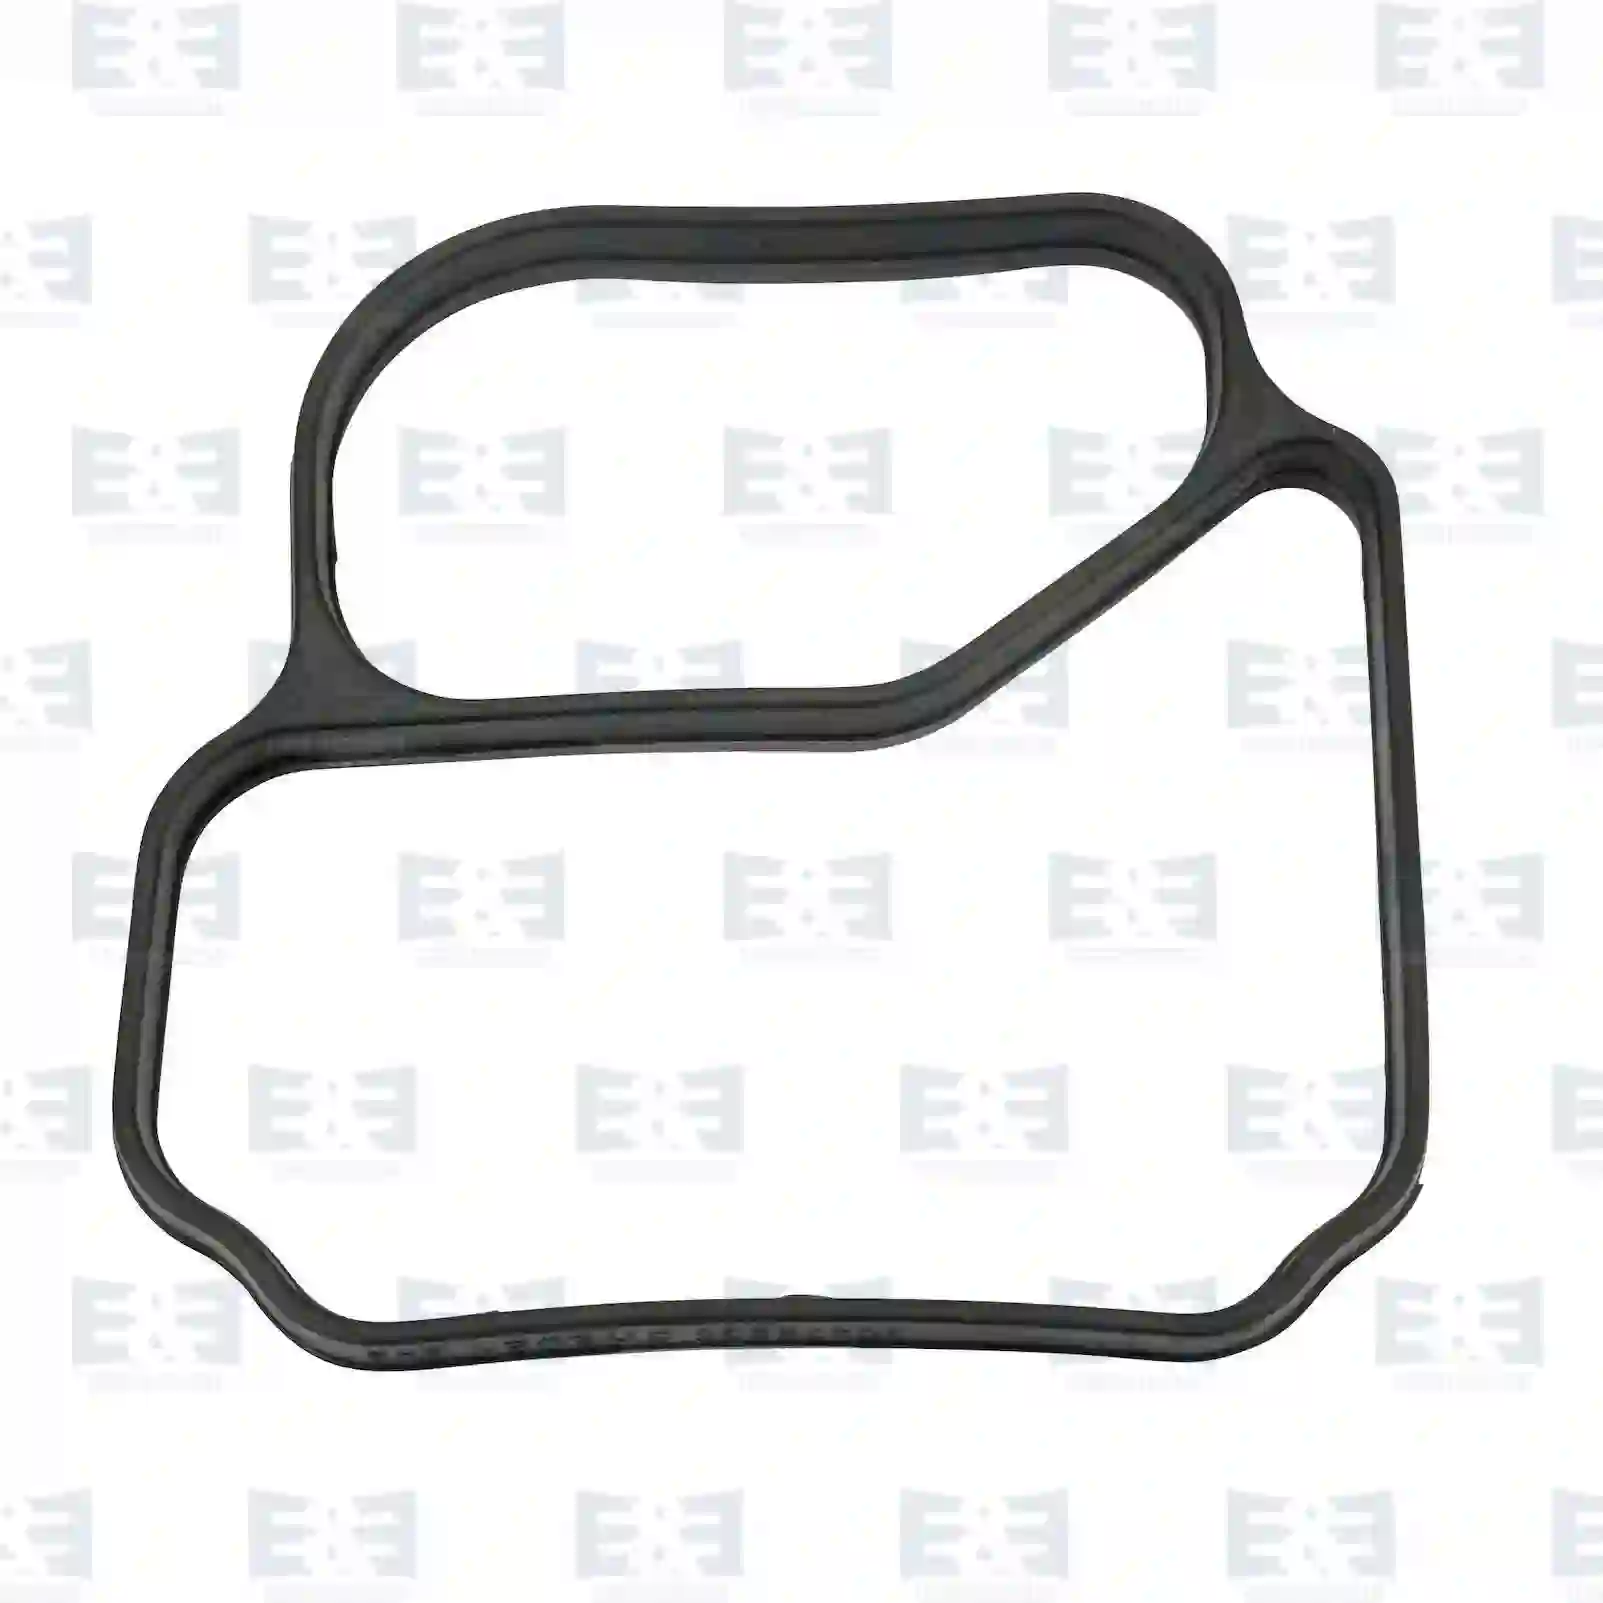 Gasket, cooling water pipe, 2E2203447, 7420479636, 20479636, ZG01176-0008 ||  2E2203447 E&E Truck Spare Parts | Truck Spare Parts, Auotomotive Spare Parts Gasket, cooling water pipe, 2E2203447, 7420479636, 20479636, ZG01176-0008 ||  2E2203447 E&E Truck Spare Parts | Truck Spare Parts, Auotomotive Spare Parts